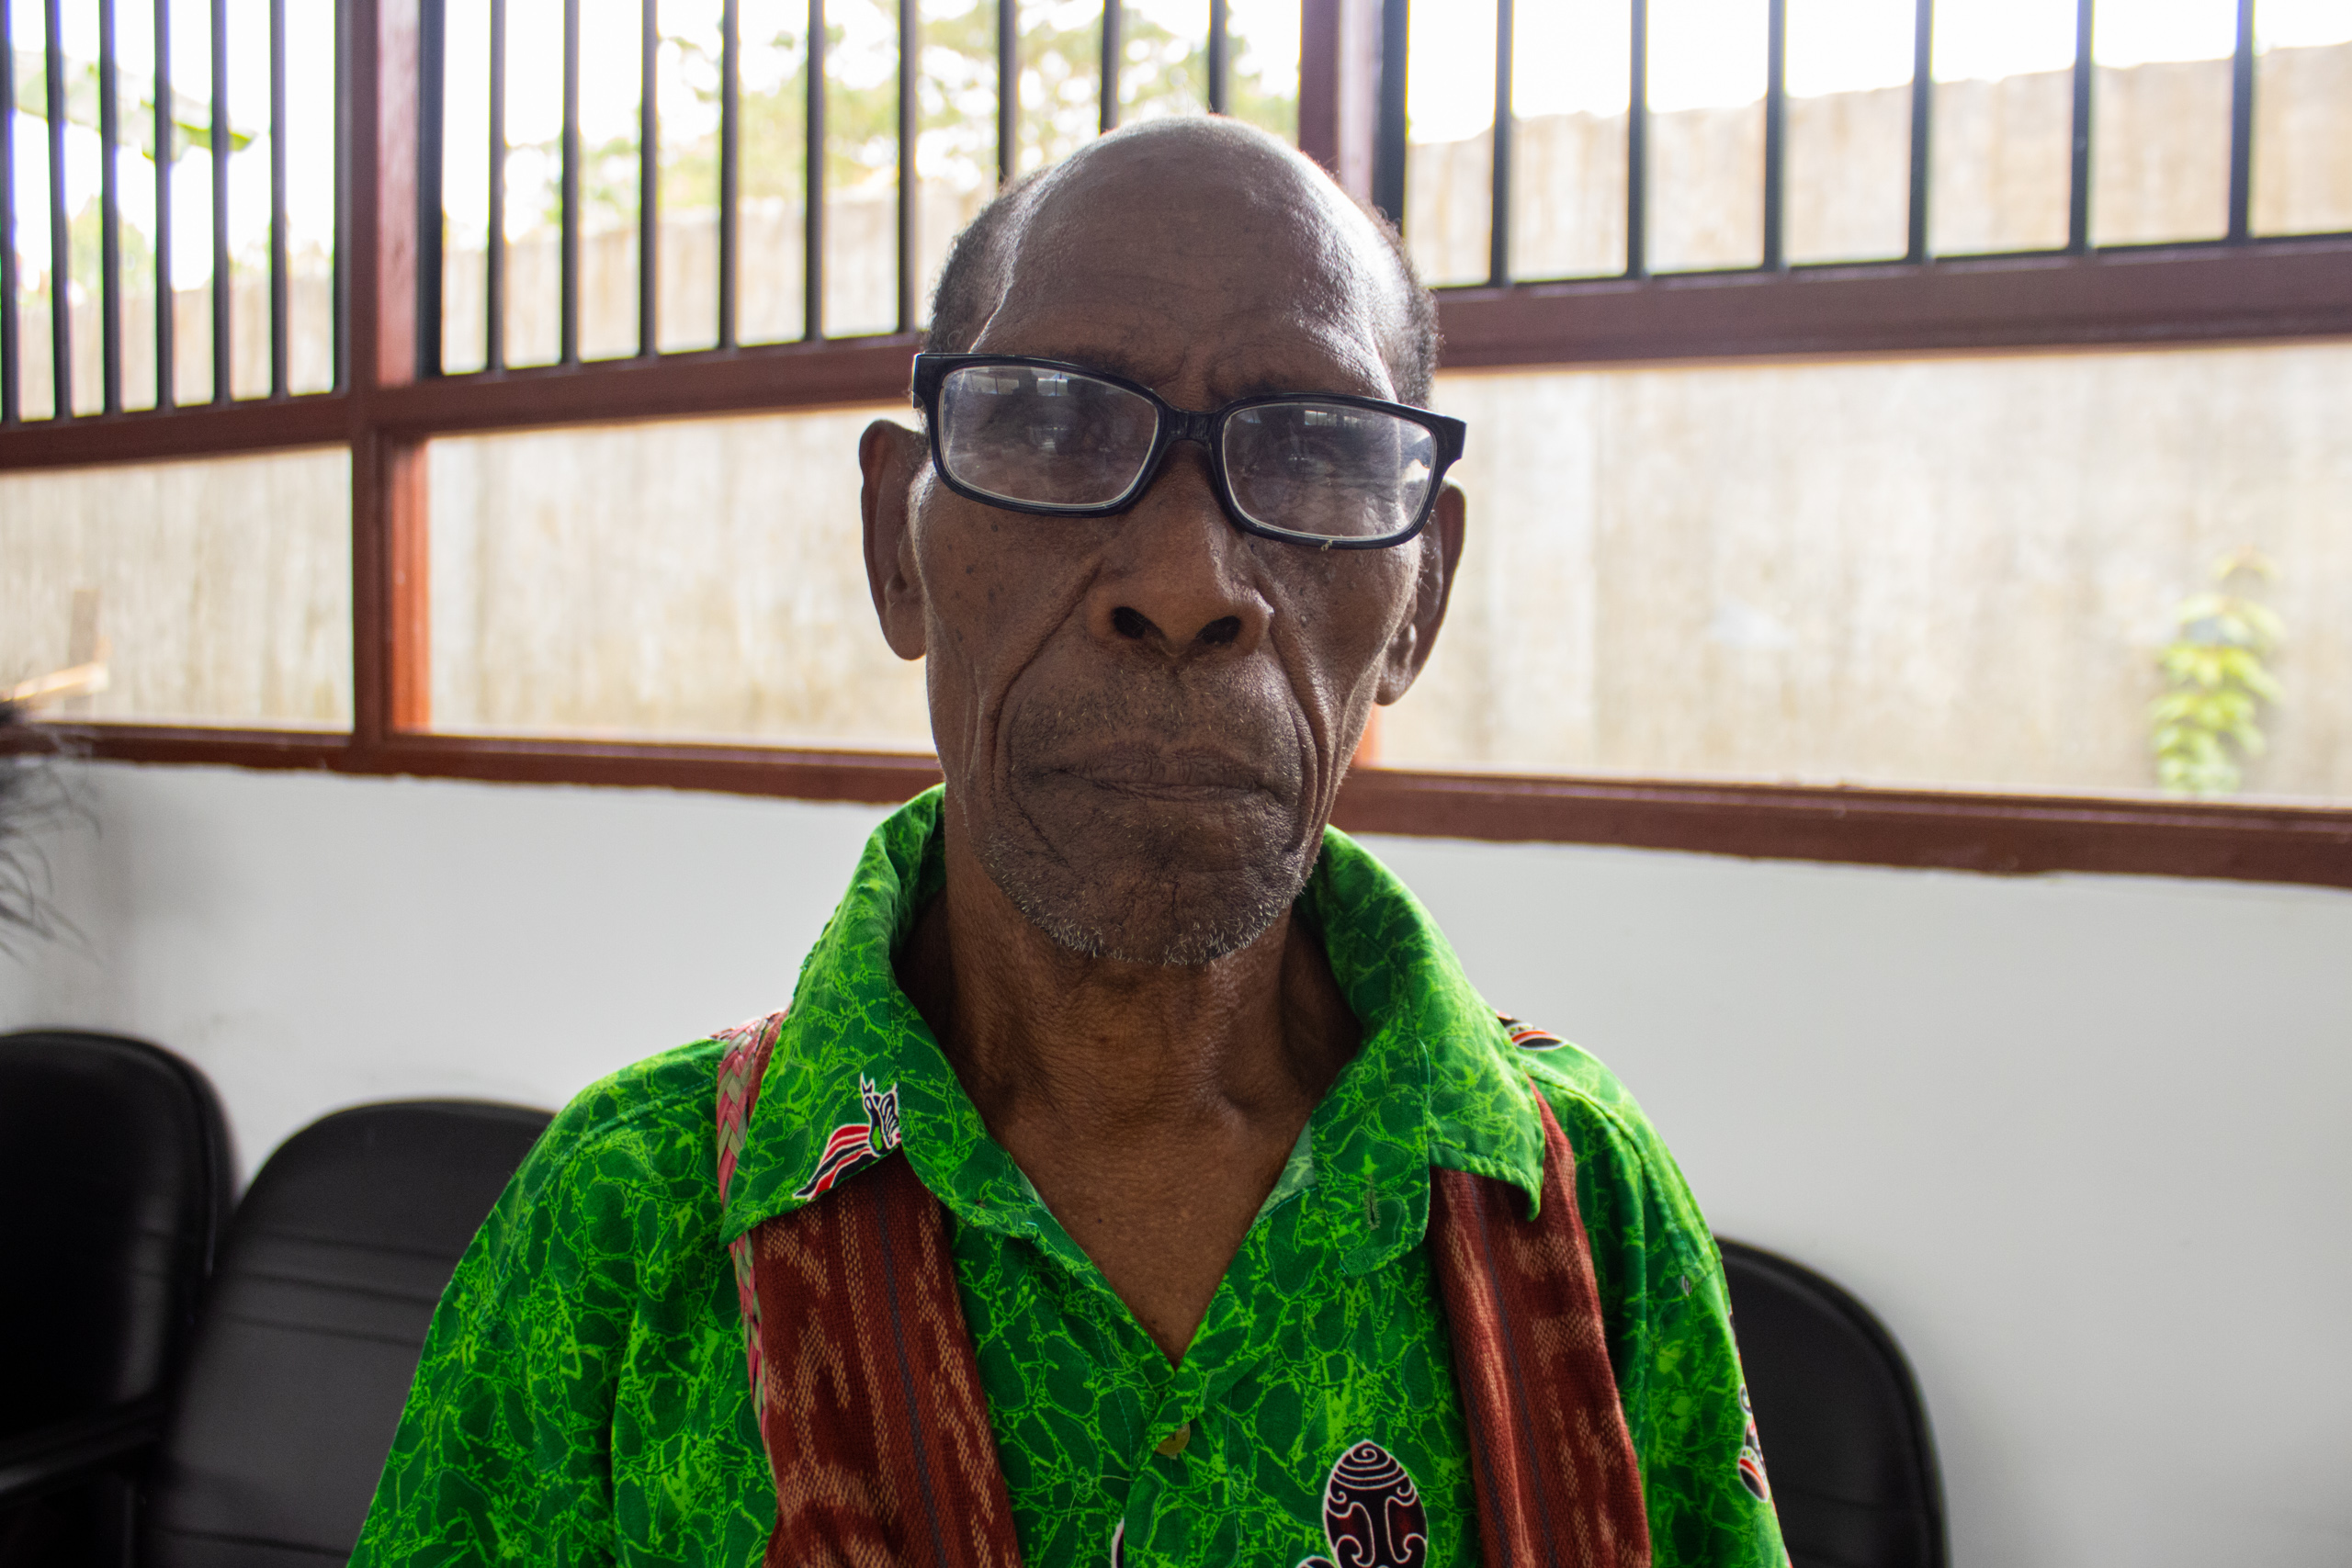 the head of the Segun Indigenous Council